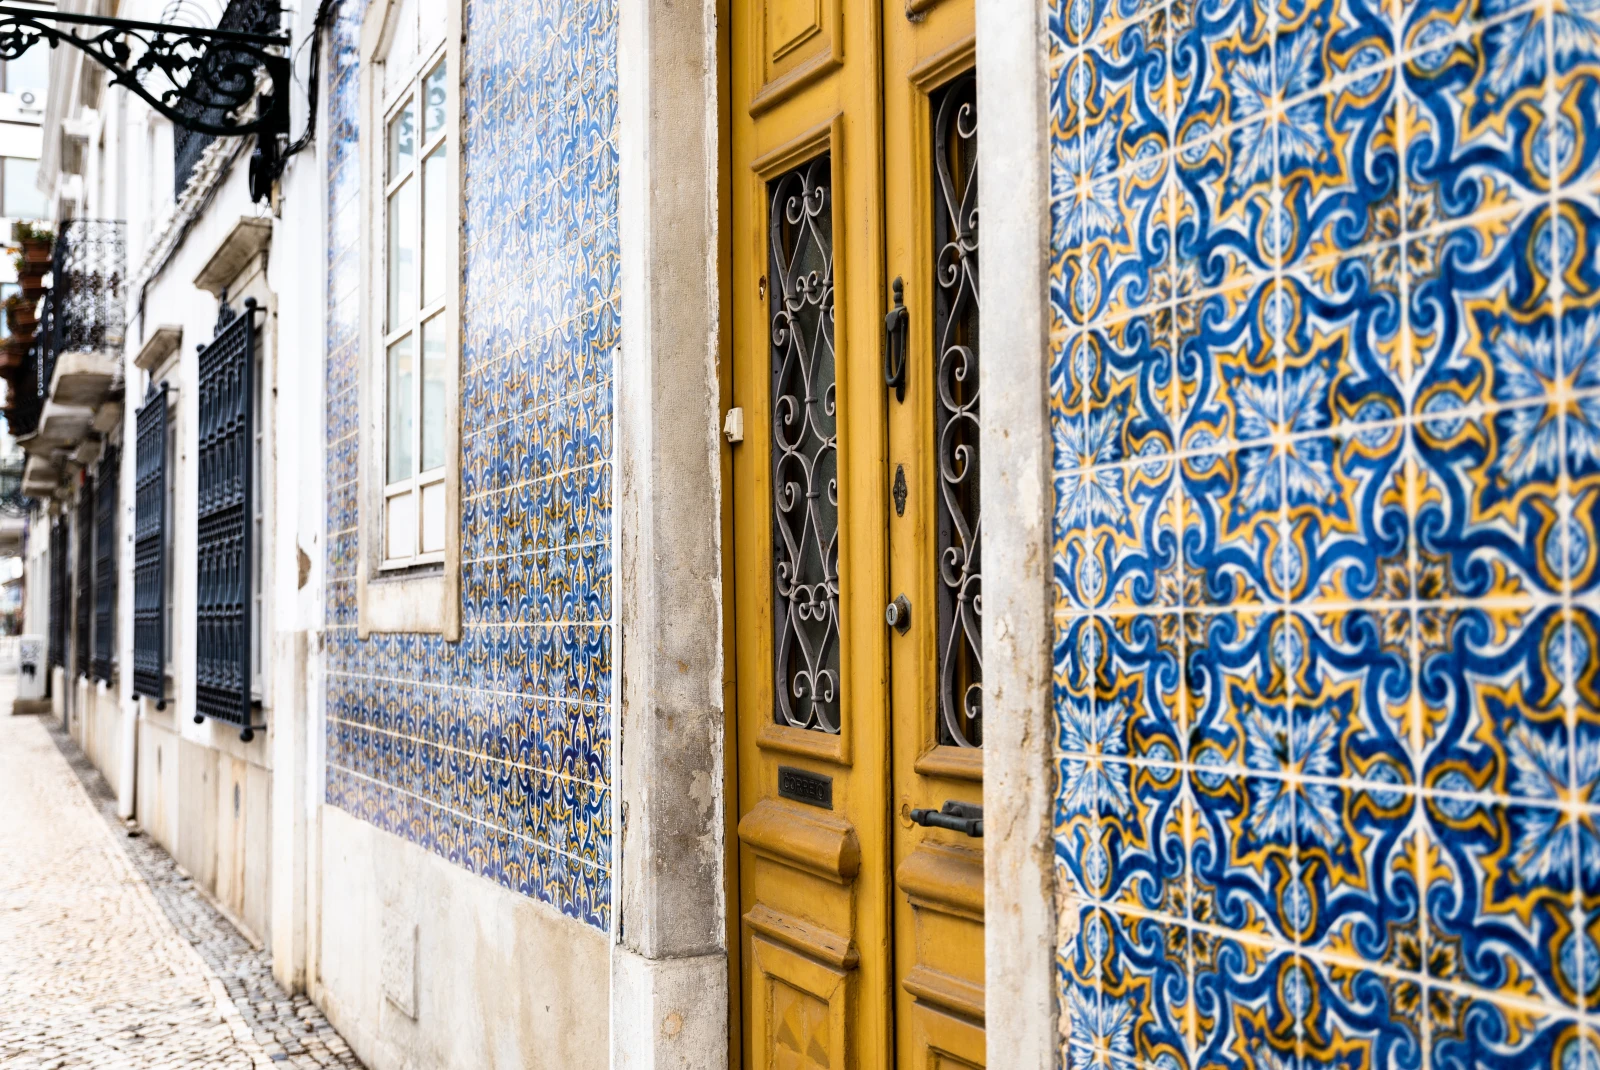 Building with blue and yellow tile wall and burnt yellow door in Portugal